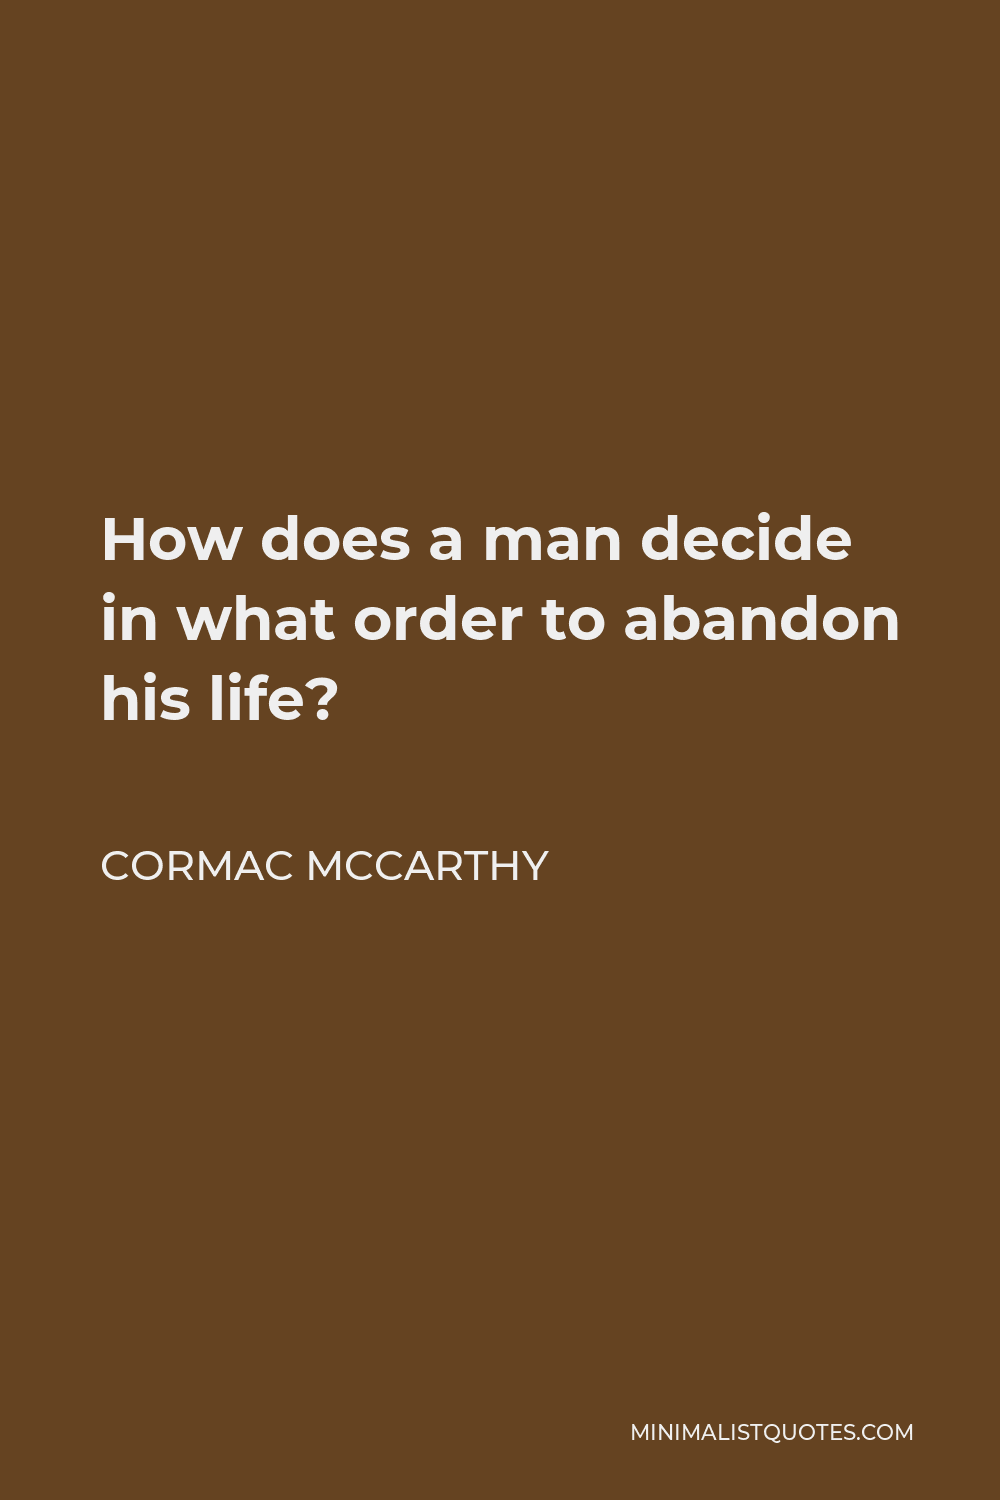 Cormac McCarthy Quote - How does a man decide in what order to abandon his life?